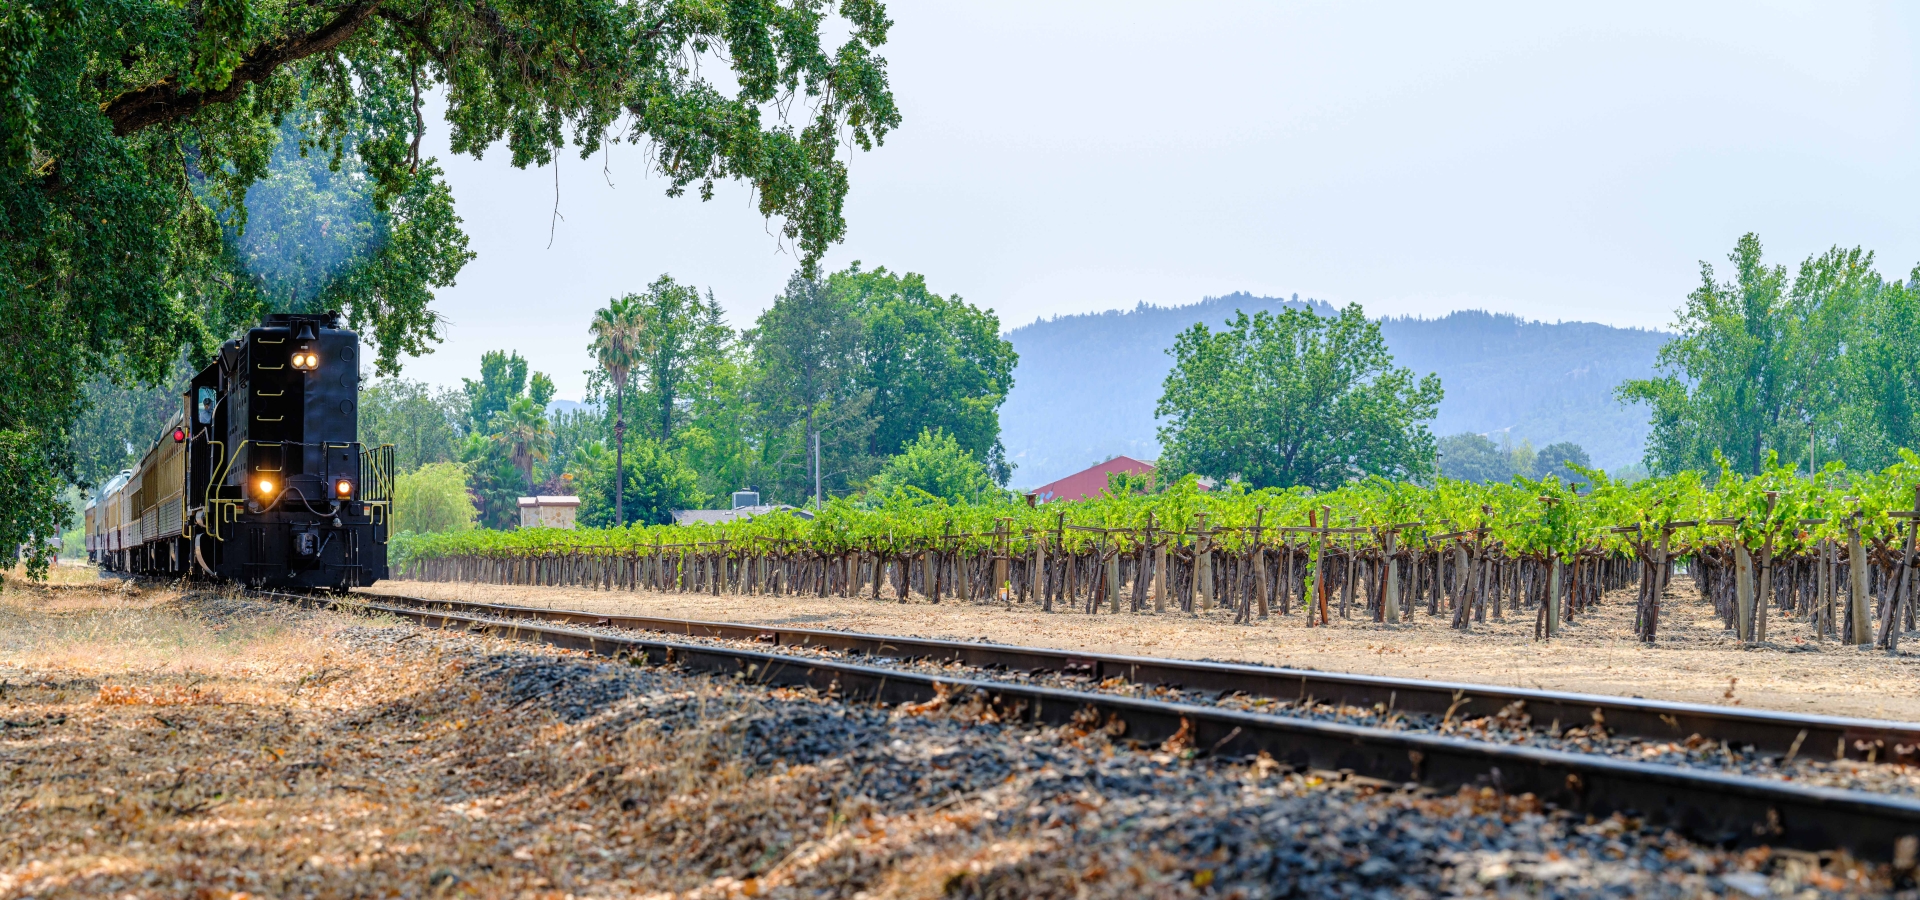 Excursions Tours through the vineyards of Napa Valley